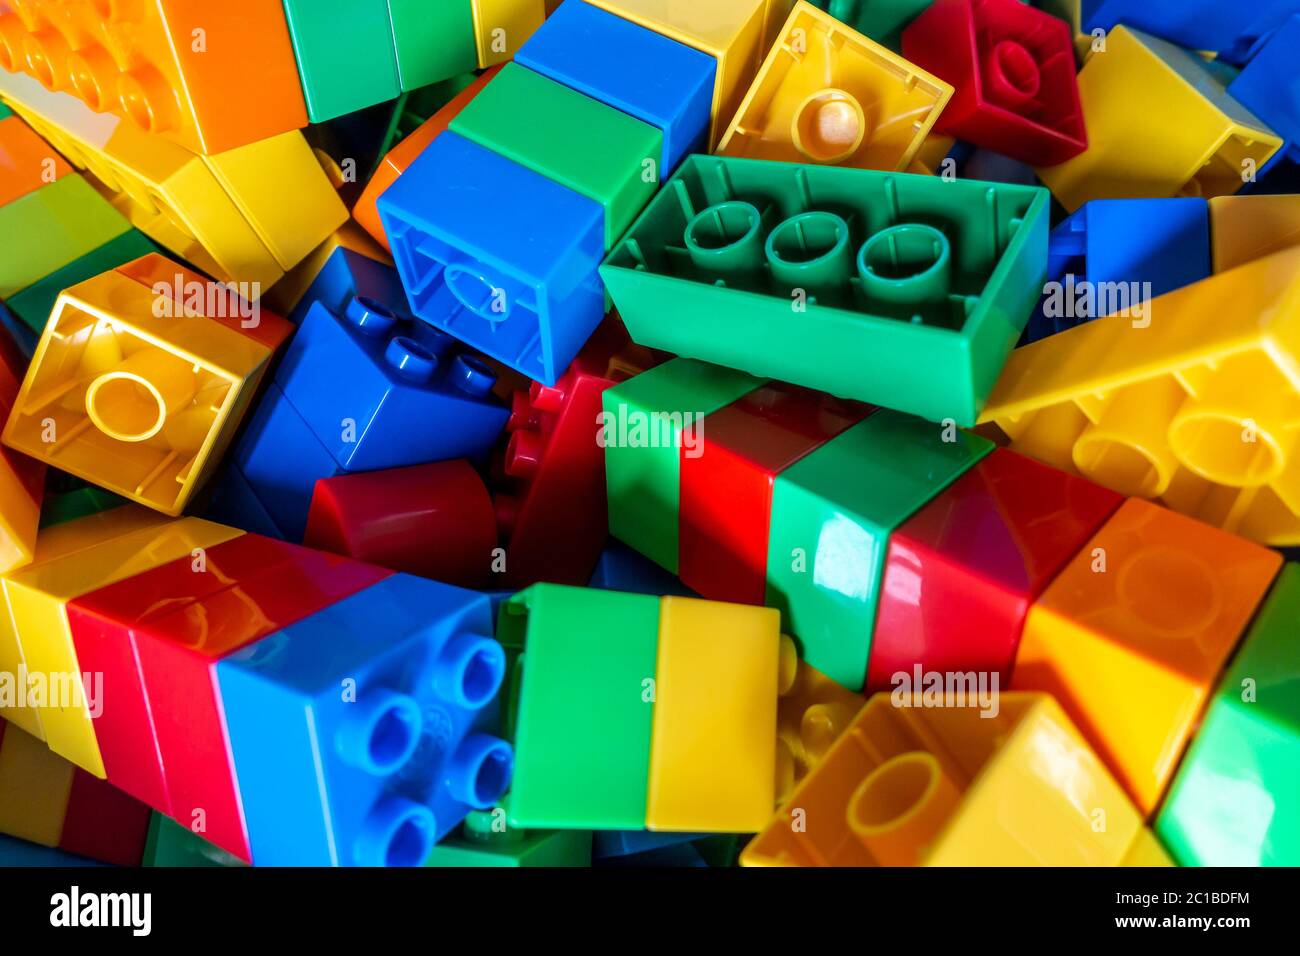 Colourful plastic building block toy set as used by a young child which promotes problem solving and creativity, Stock Photo